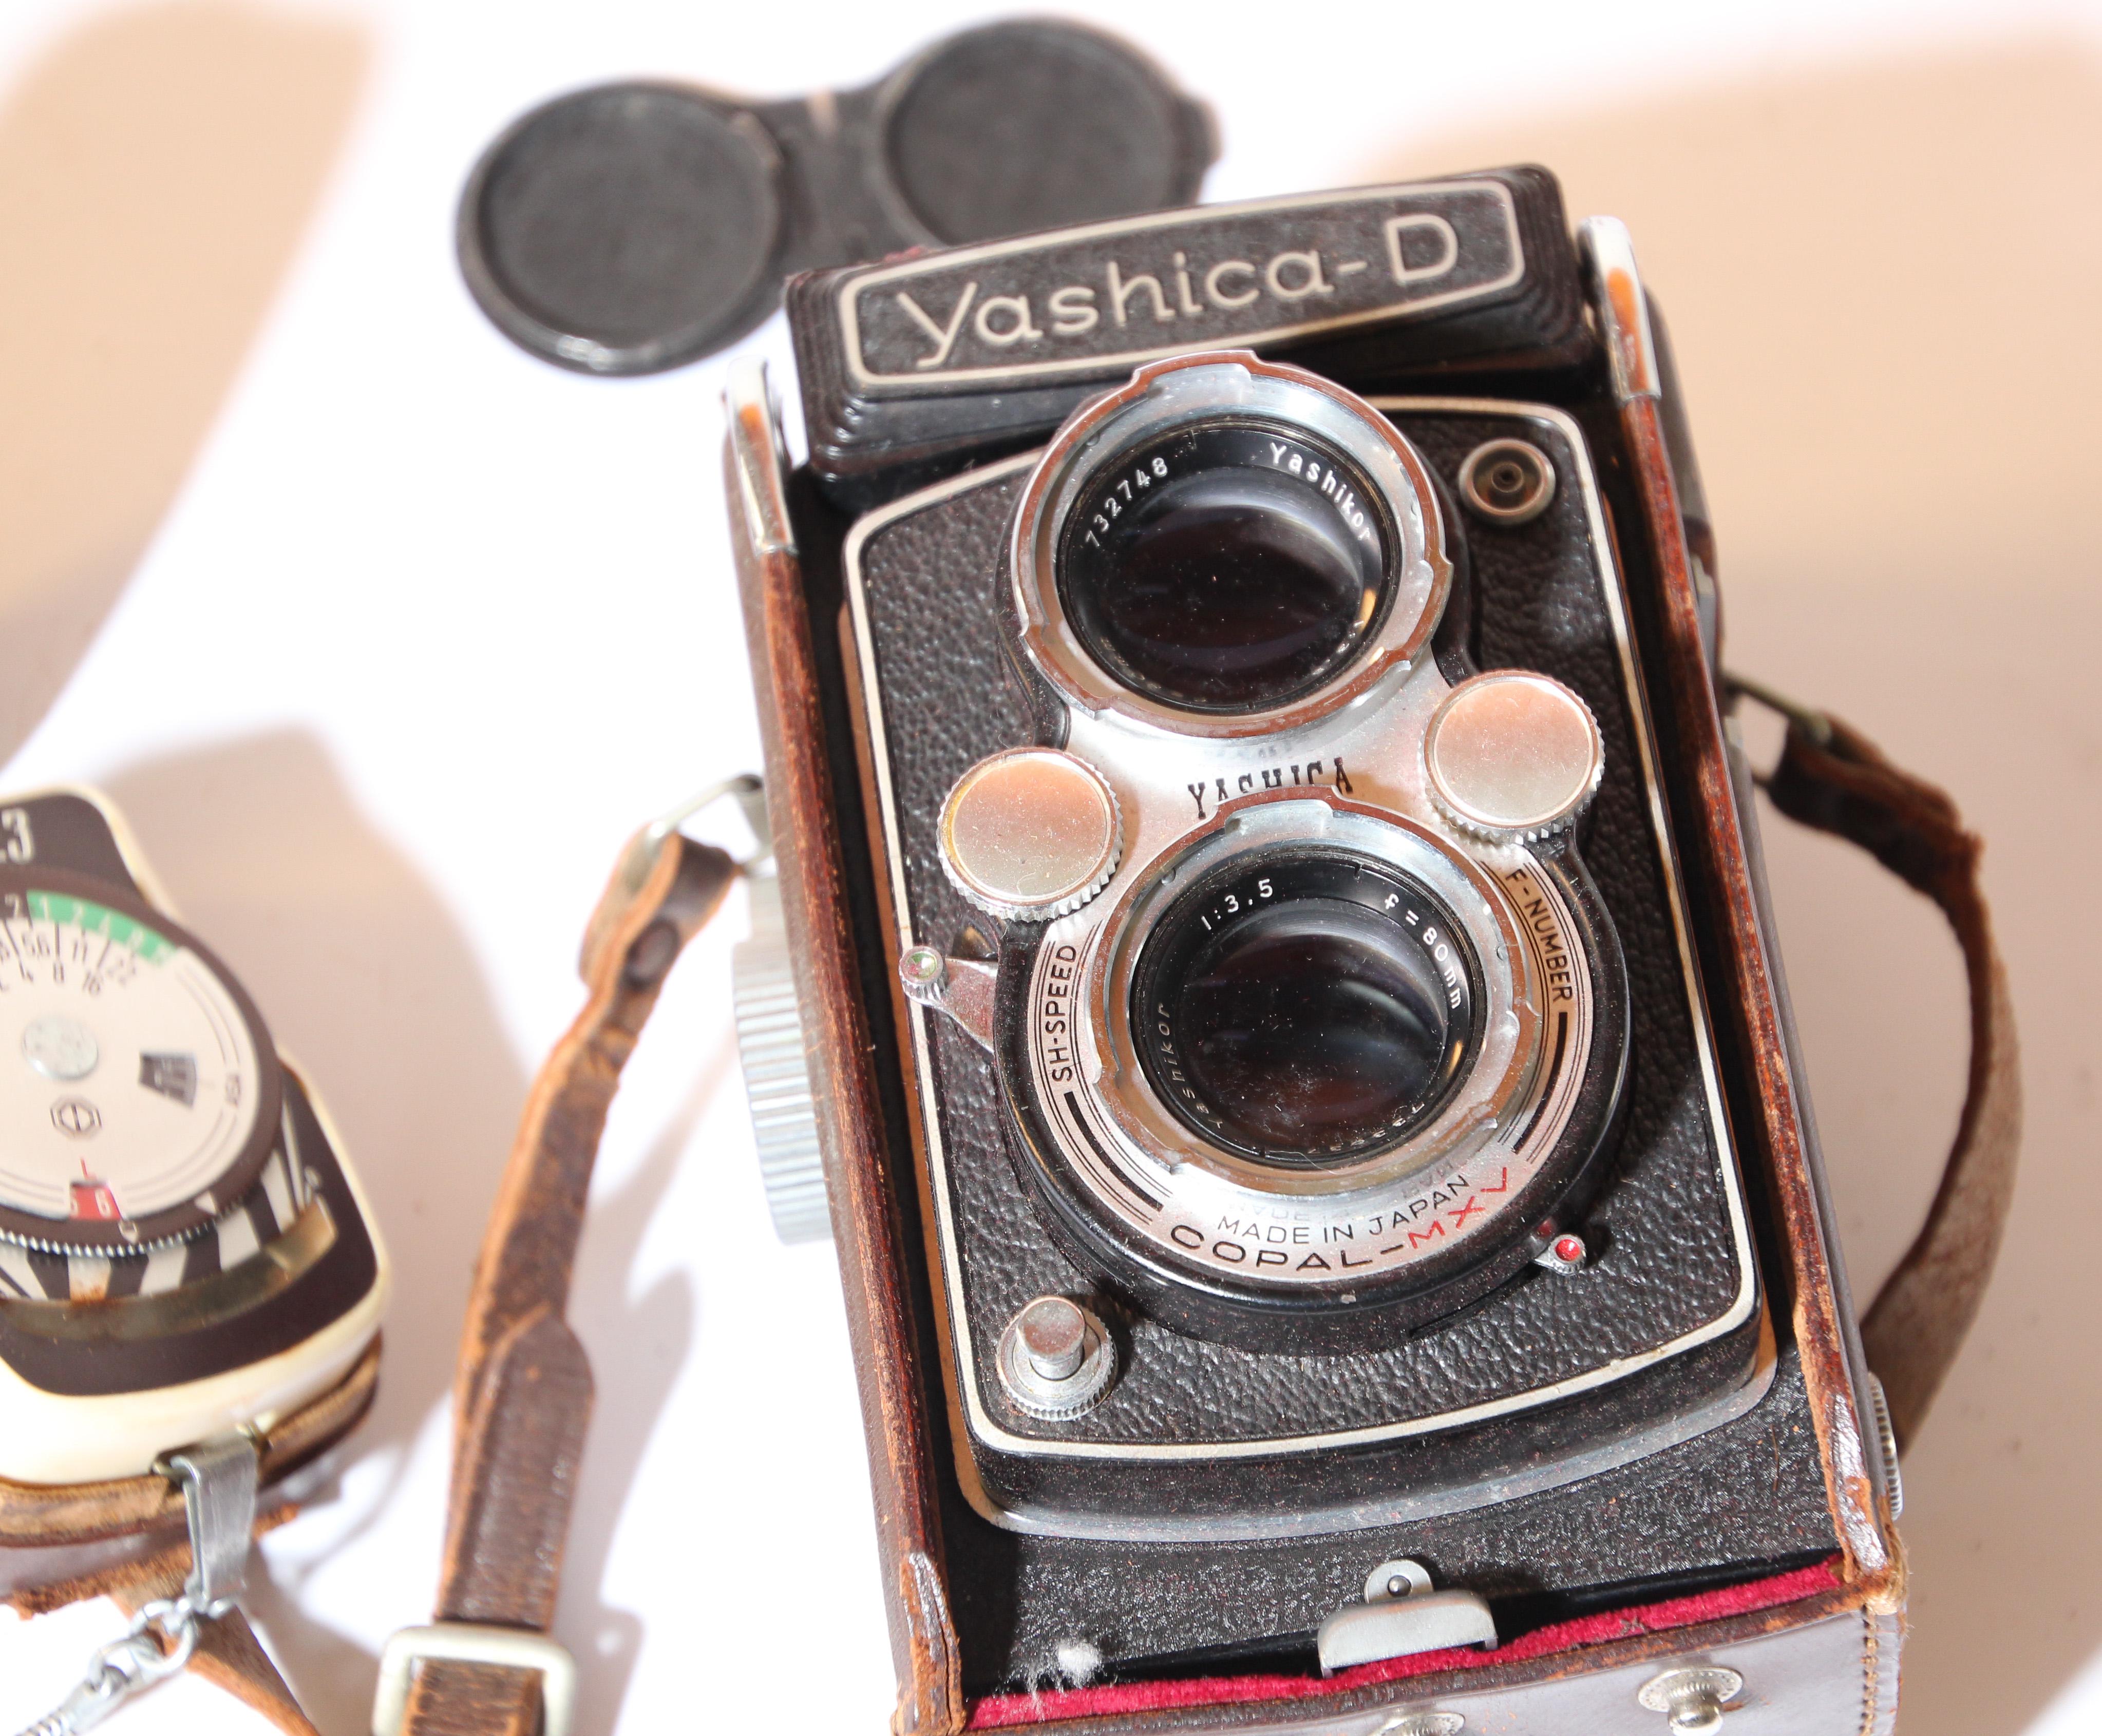 Yashica-D Camera with Case and Accessories, circa 1958 5